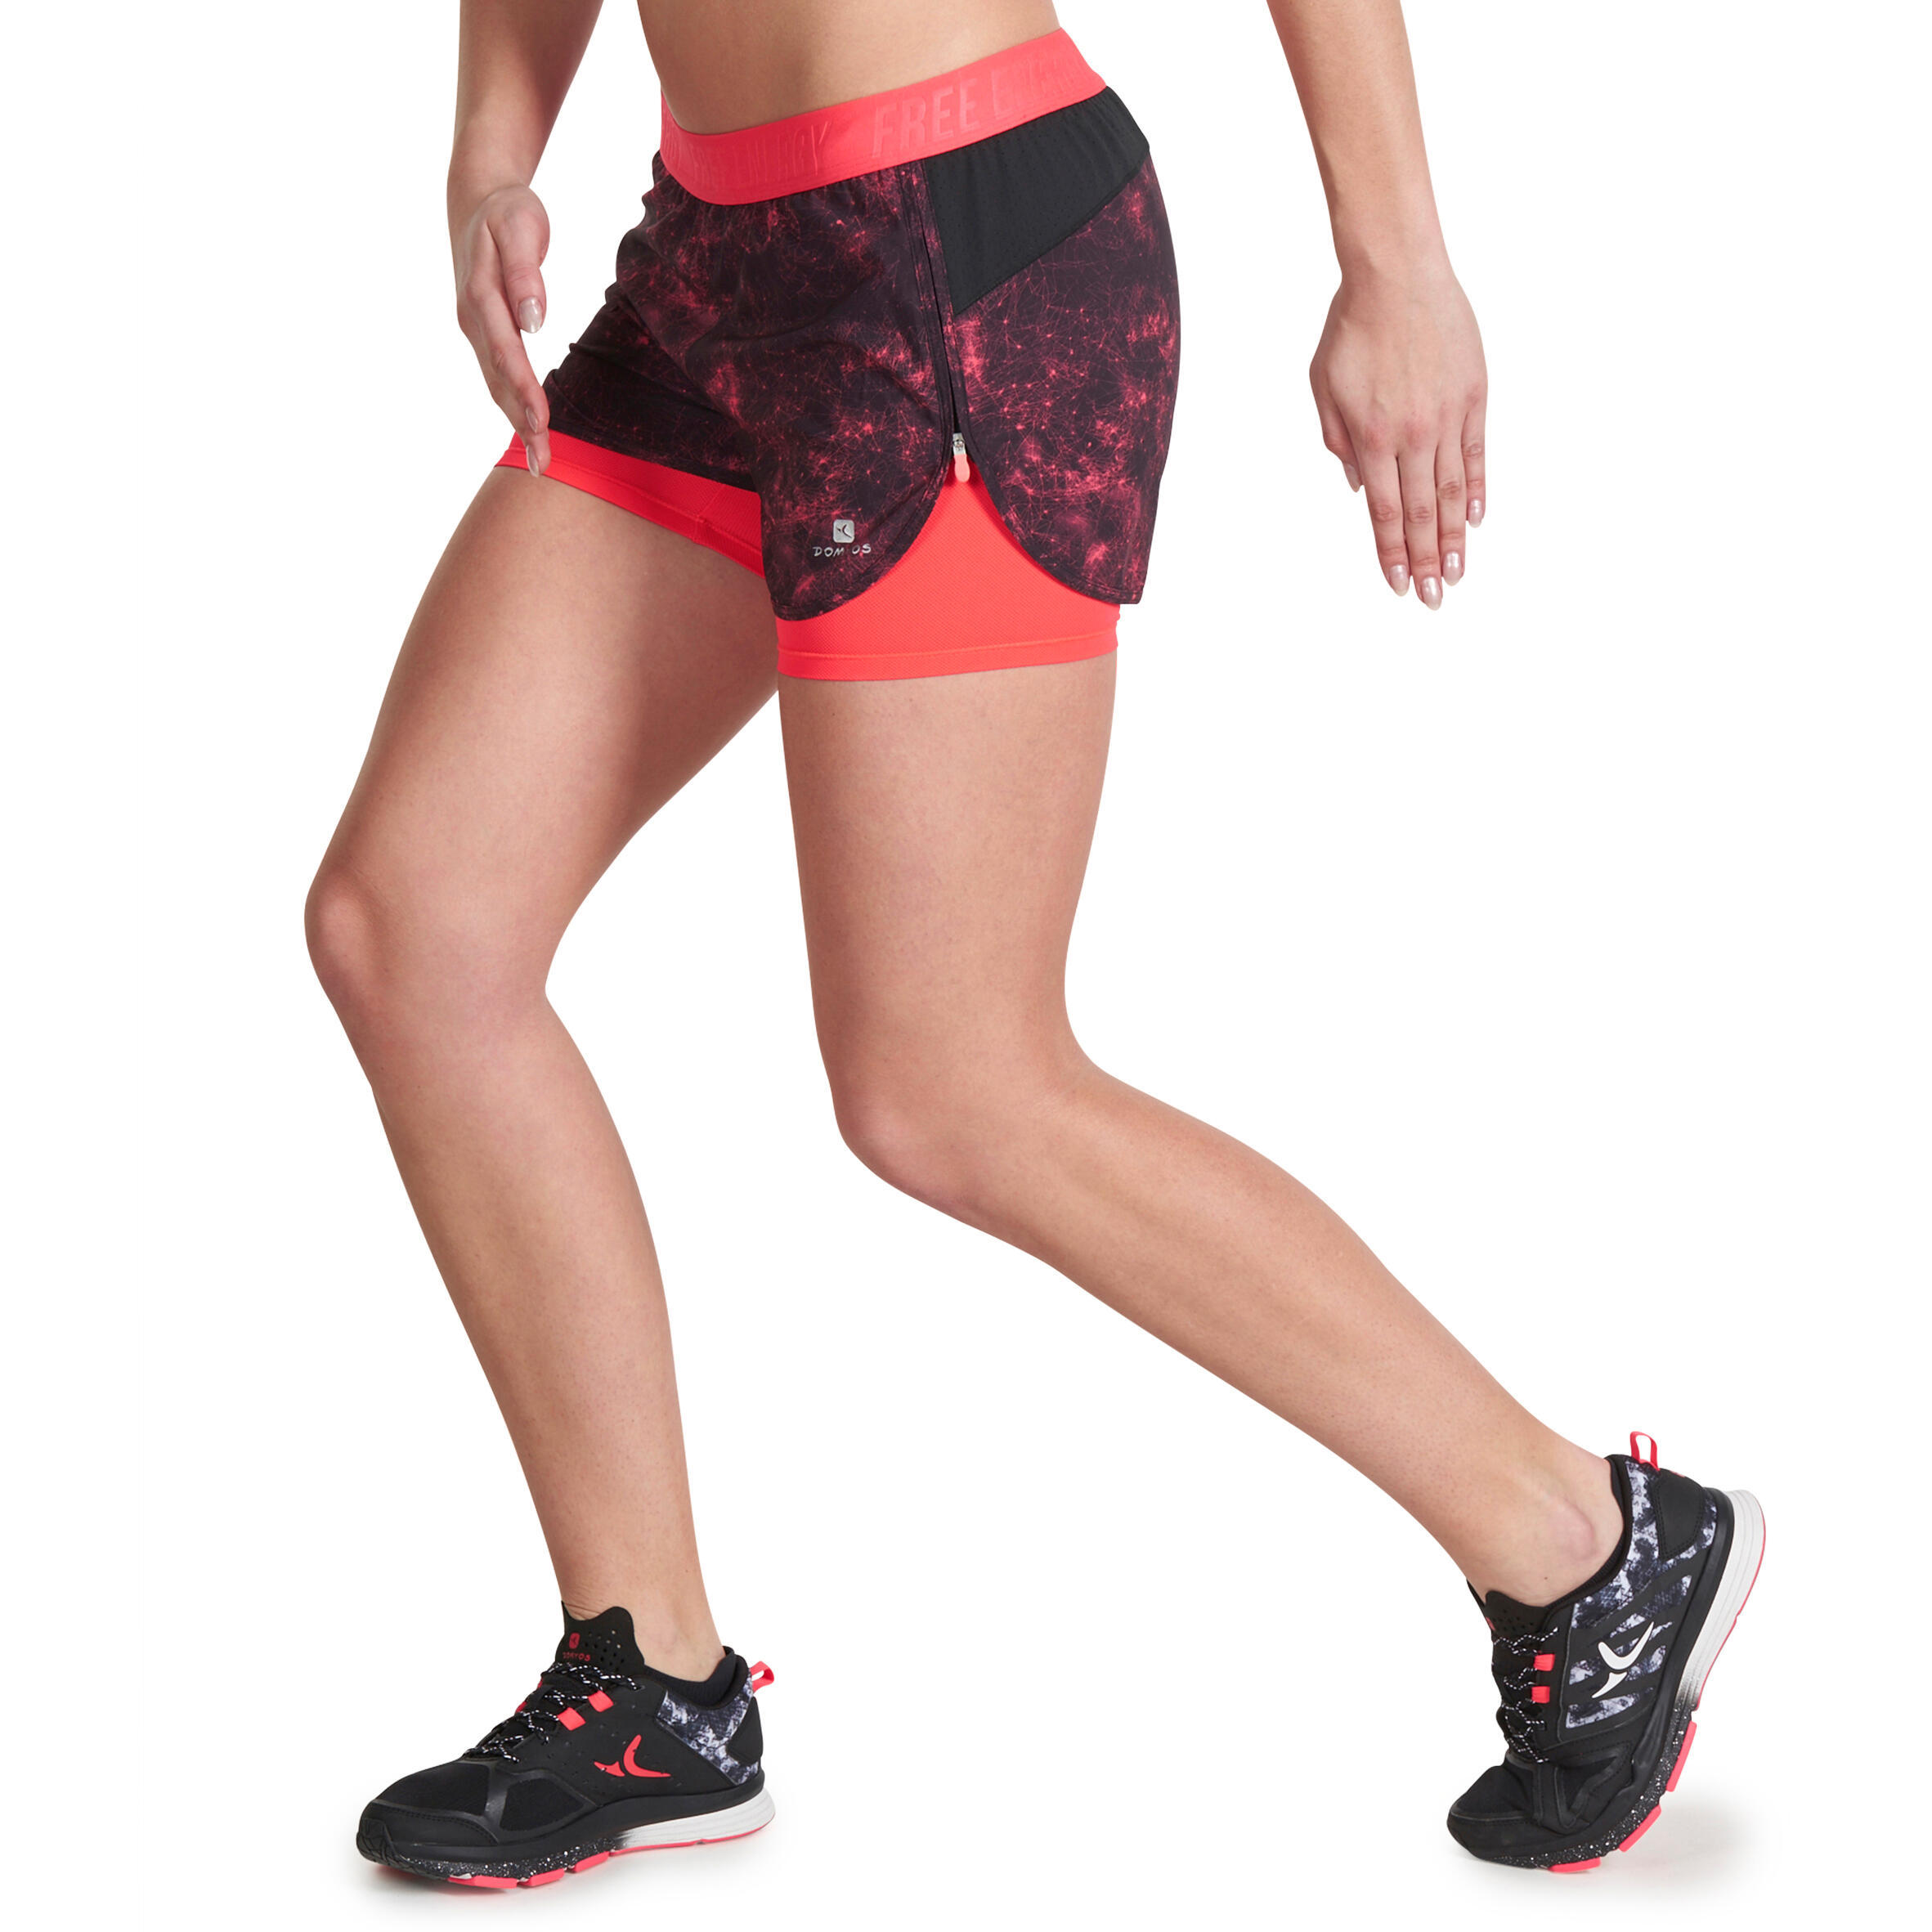 Energy Xtreme Women's 2-in-1 Fitness Shorts - Black/Pink Print 5/14